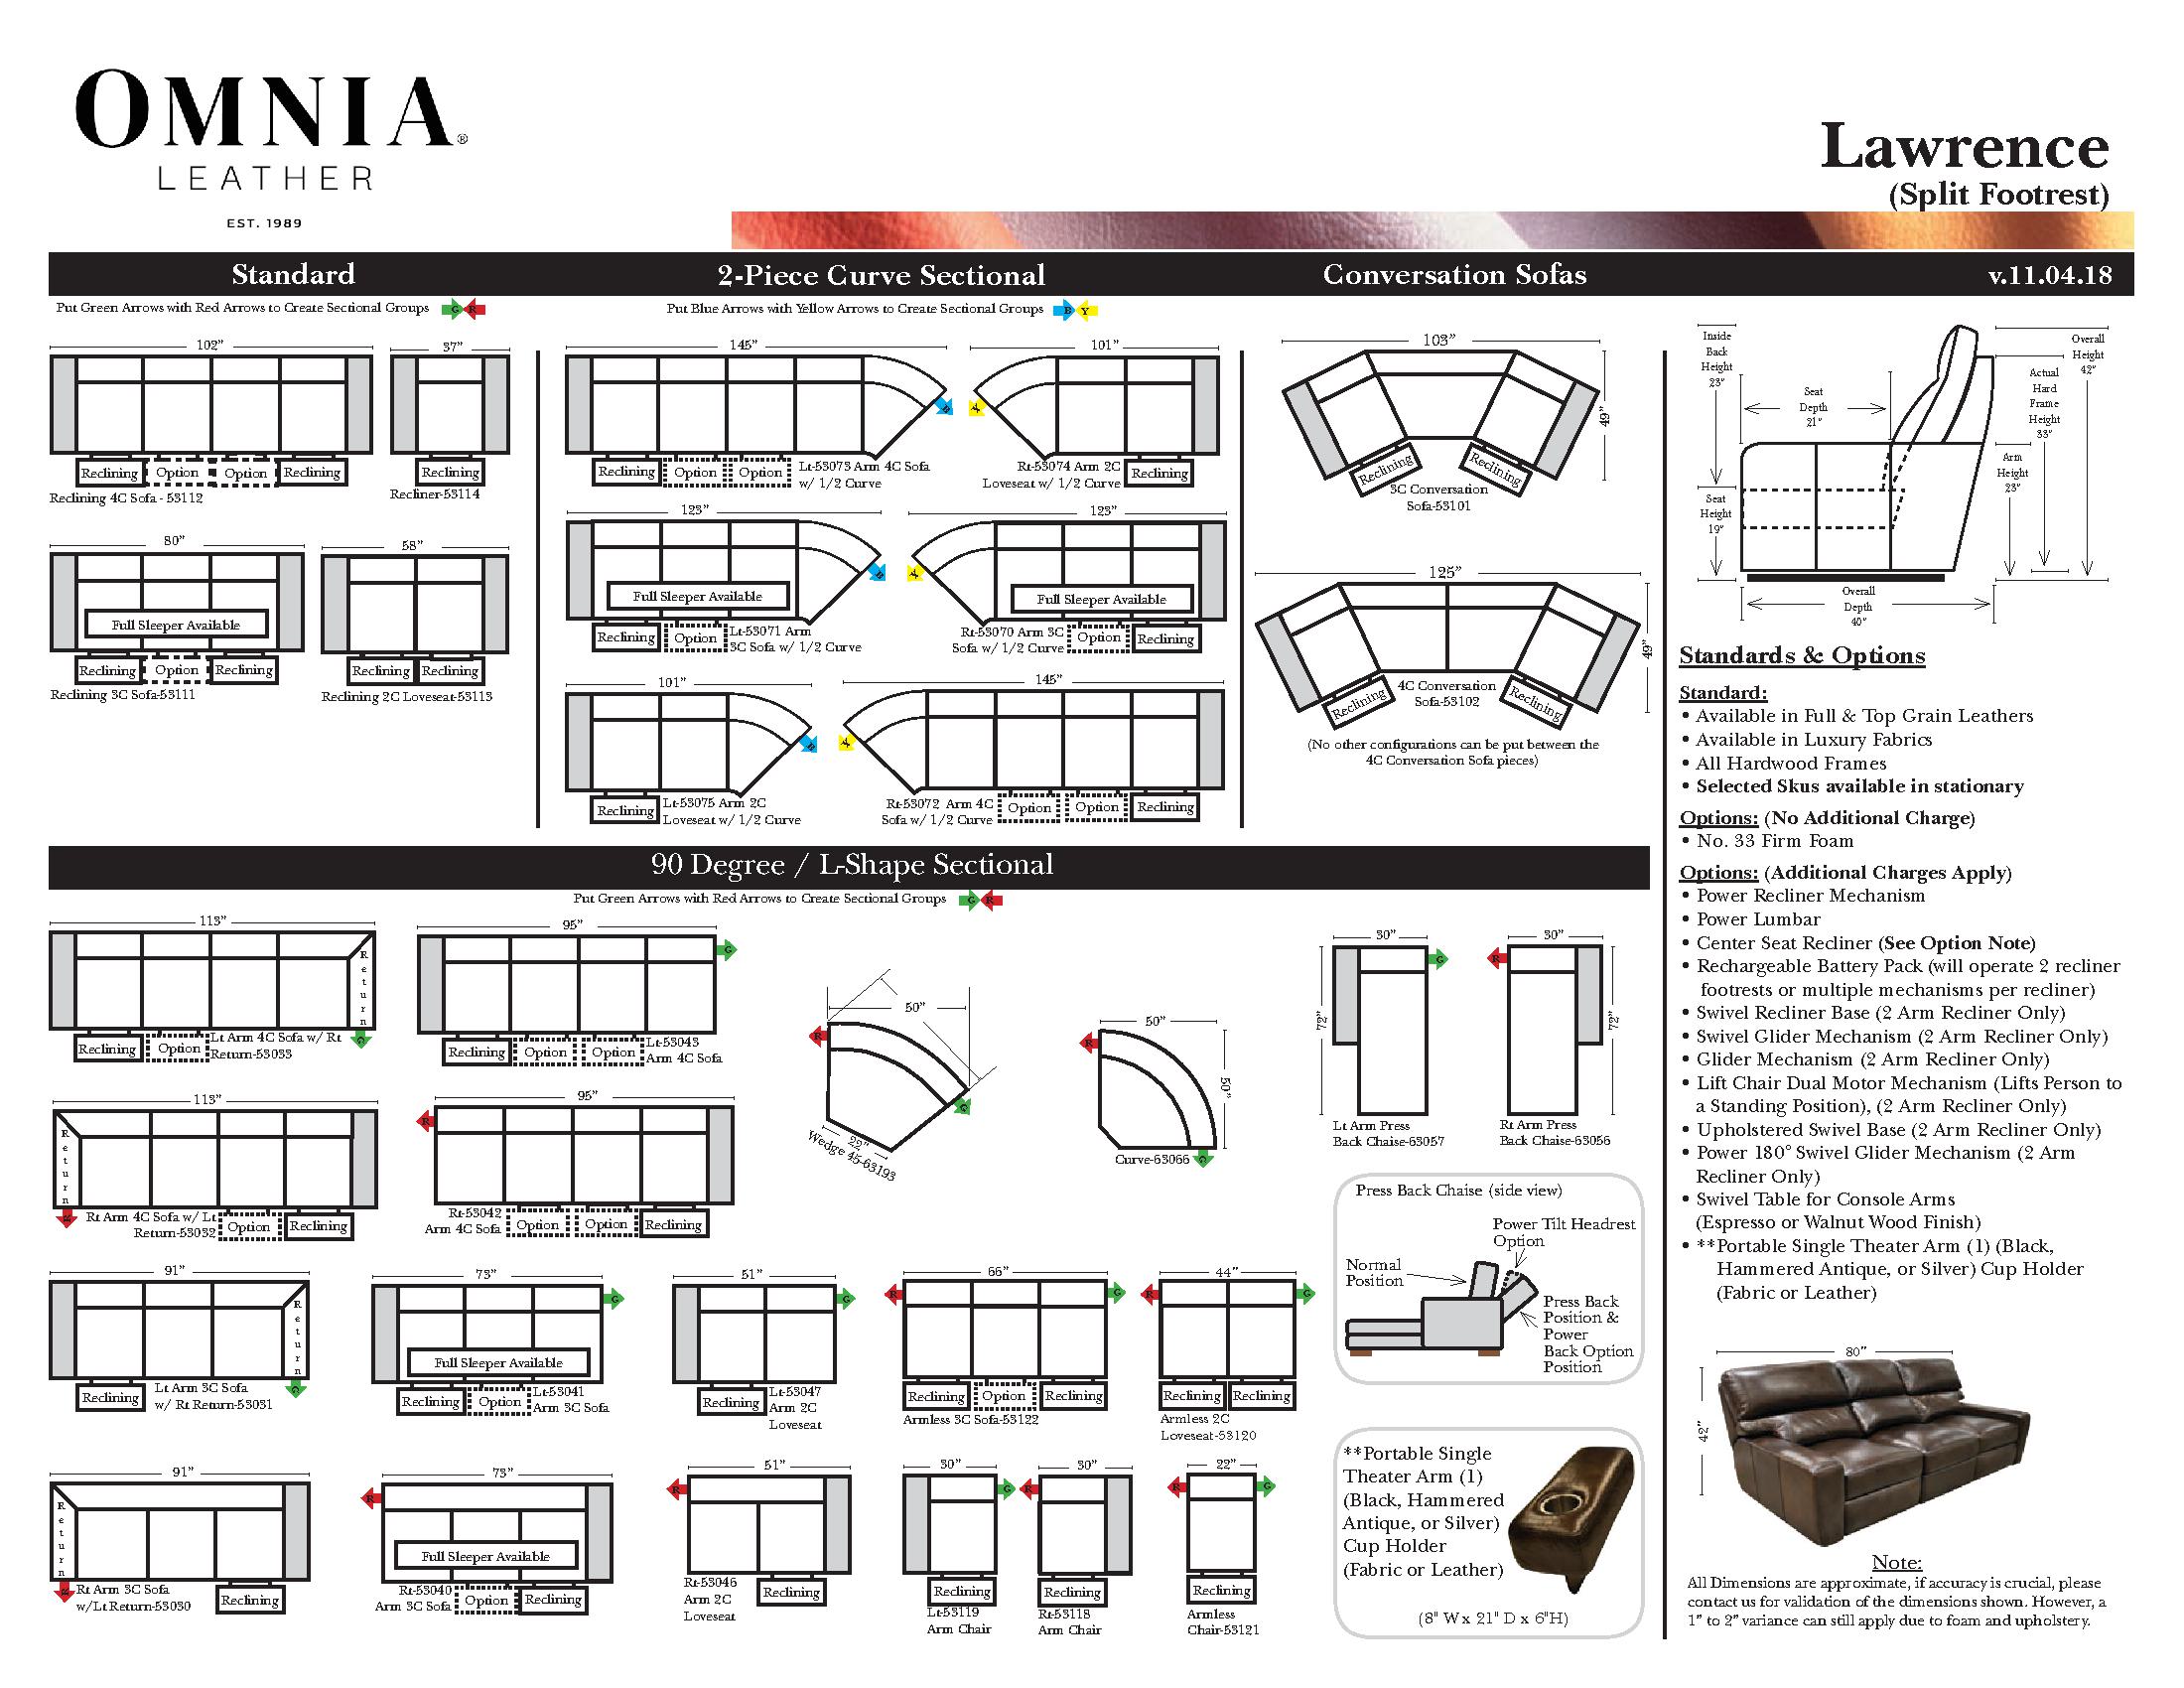 Lawrence Omnia Layout